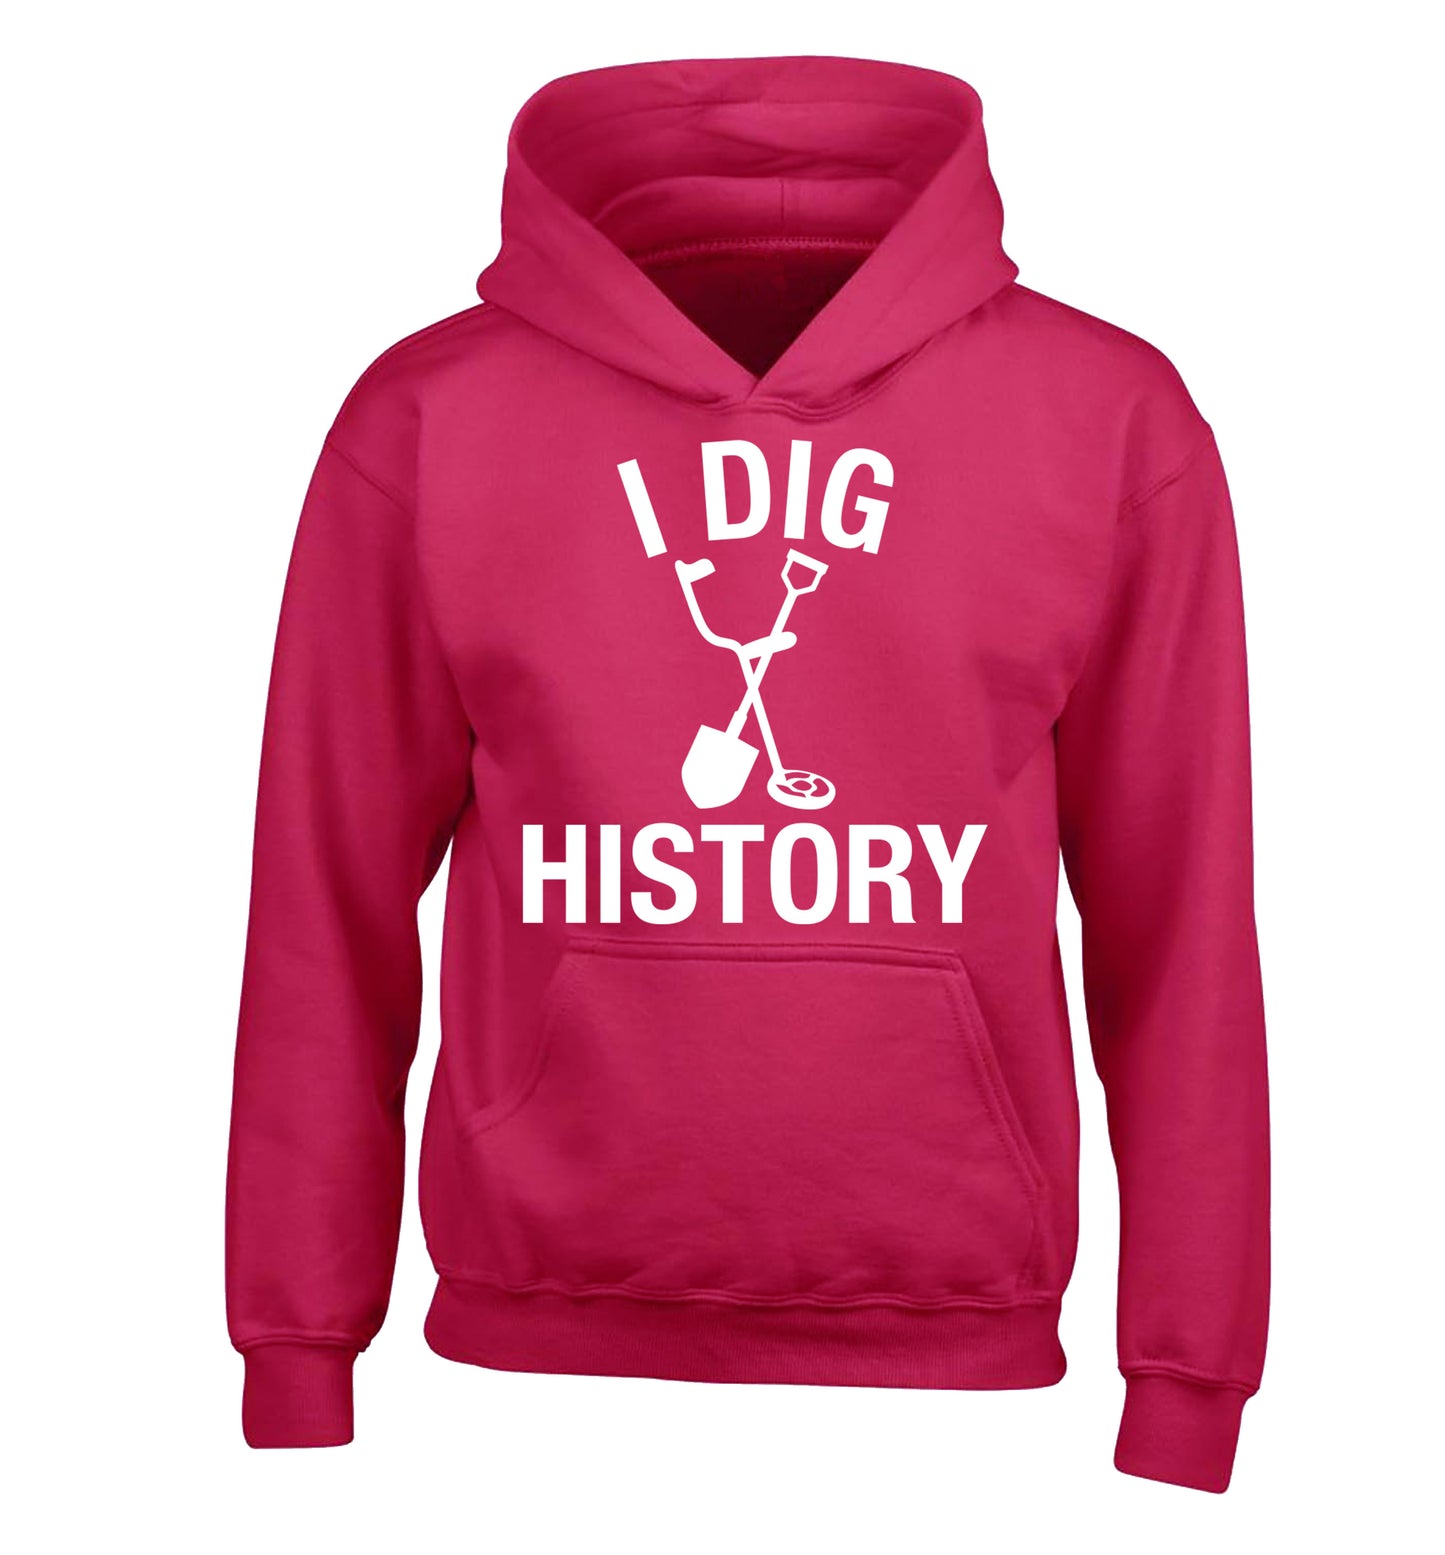 I dig history children's pink hoodie 12-13 Years